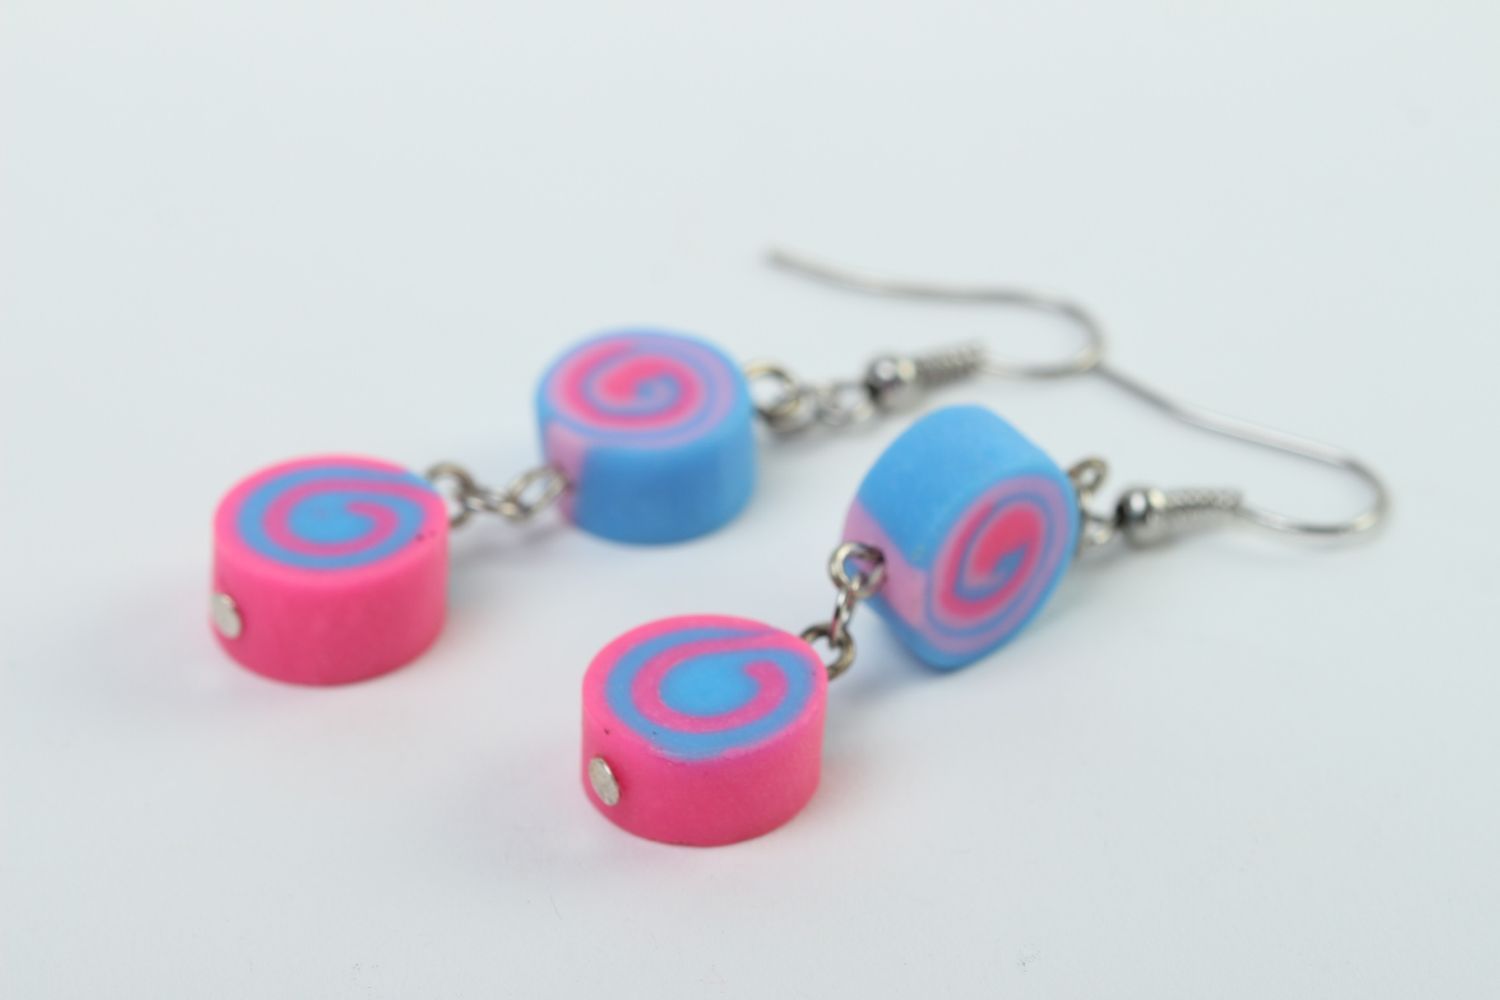 Handmade bright cute earrings designer polymer clay jewelry earrings with charms photo 3